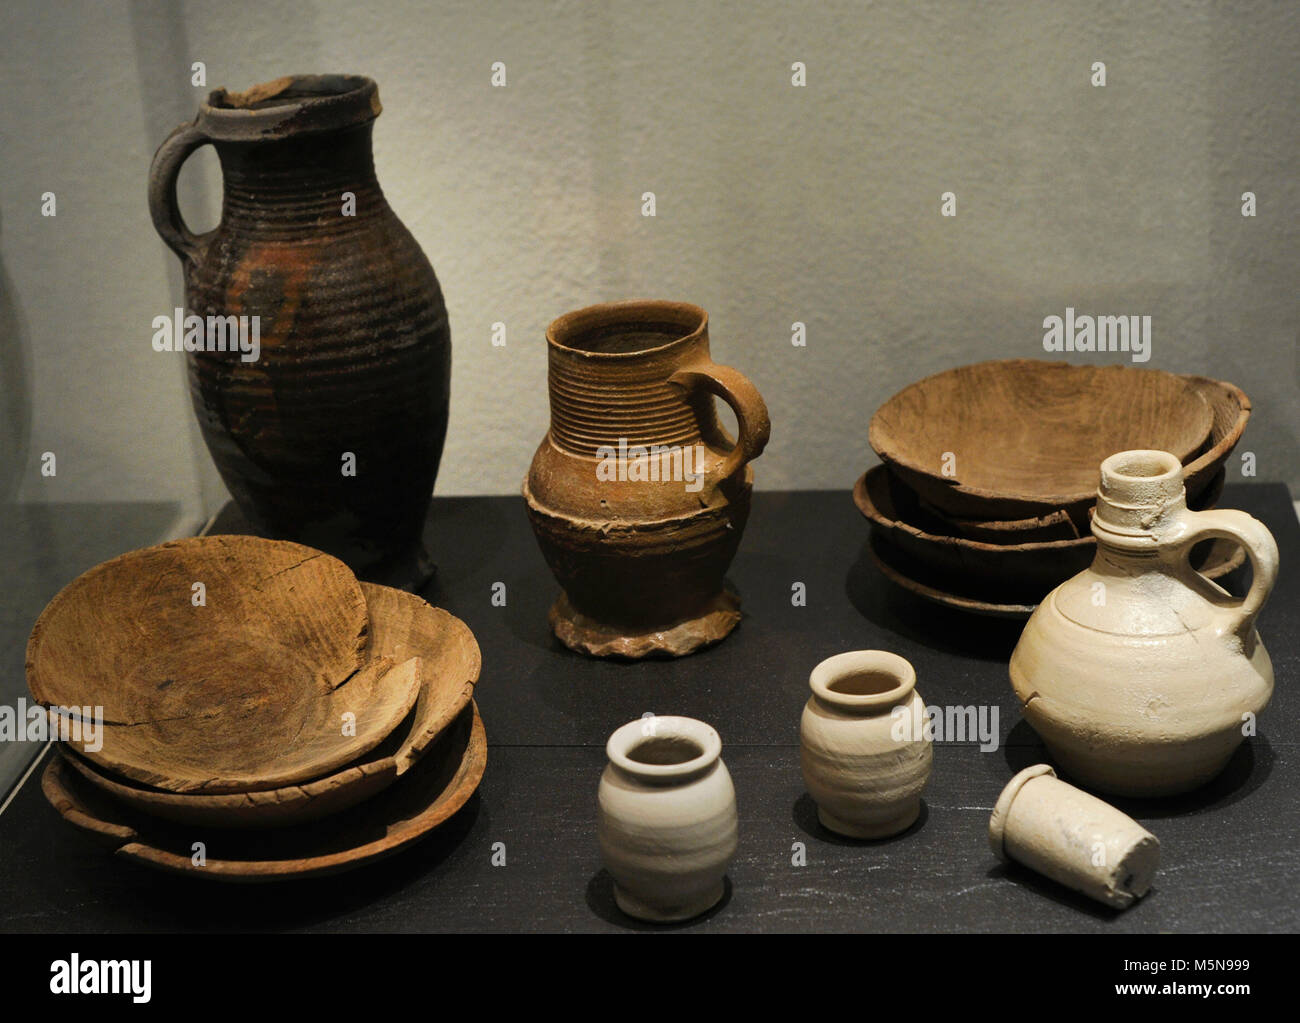 Middle Ages. Group of ceramic objects (jugs, cups, plates, etc.) belonging to a Beguine Community. Stolkgasse. 13th century. Roman-Germanic Museum. Cologne. Germany. Stock Photo